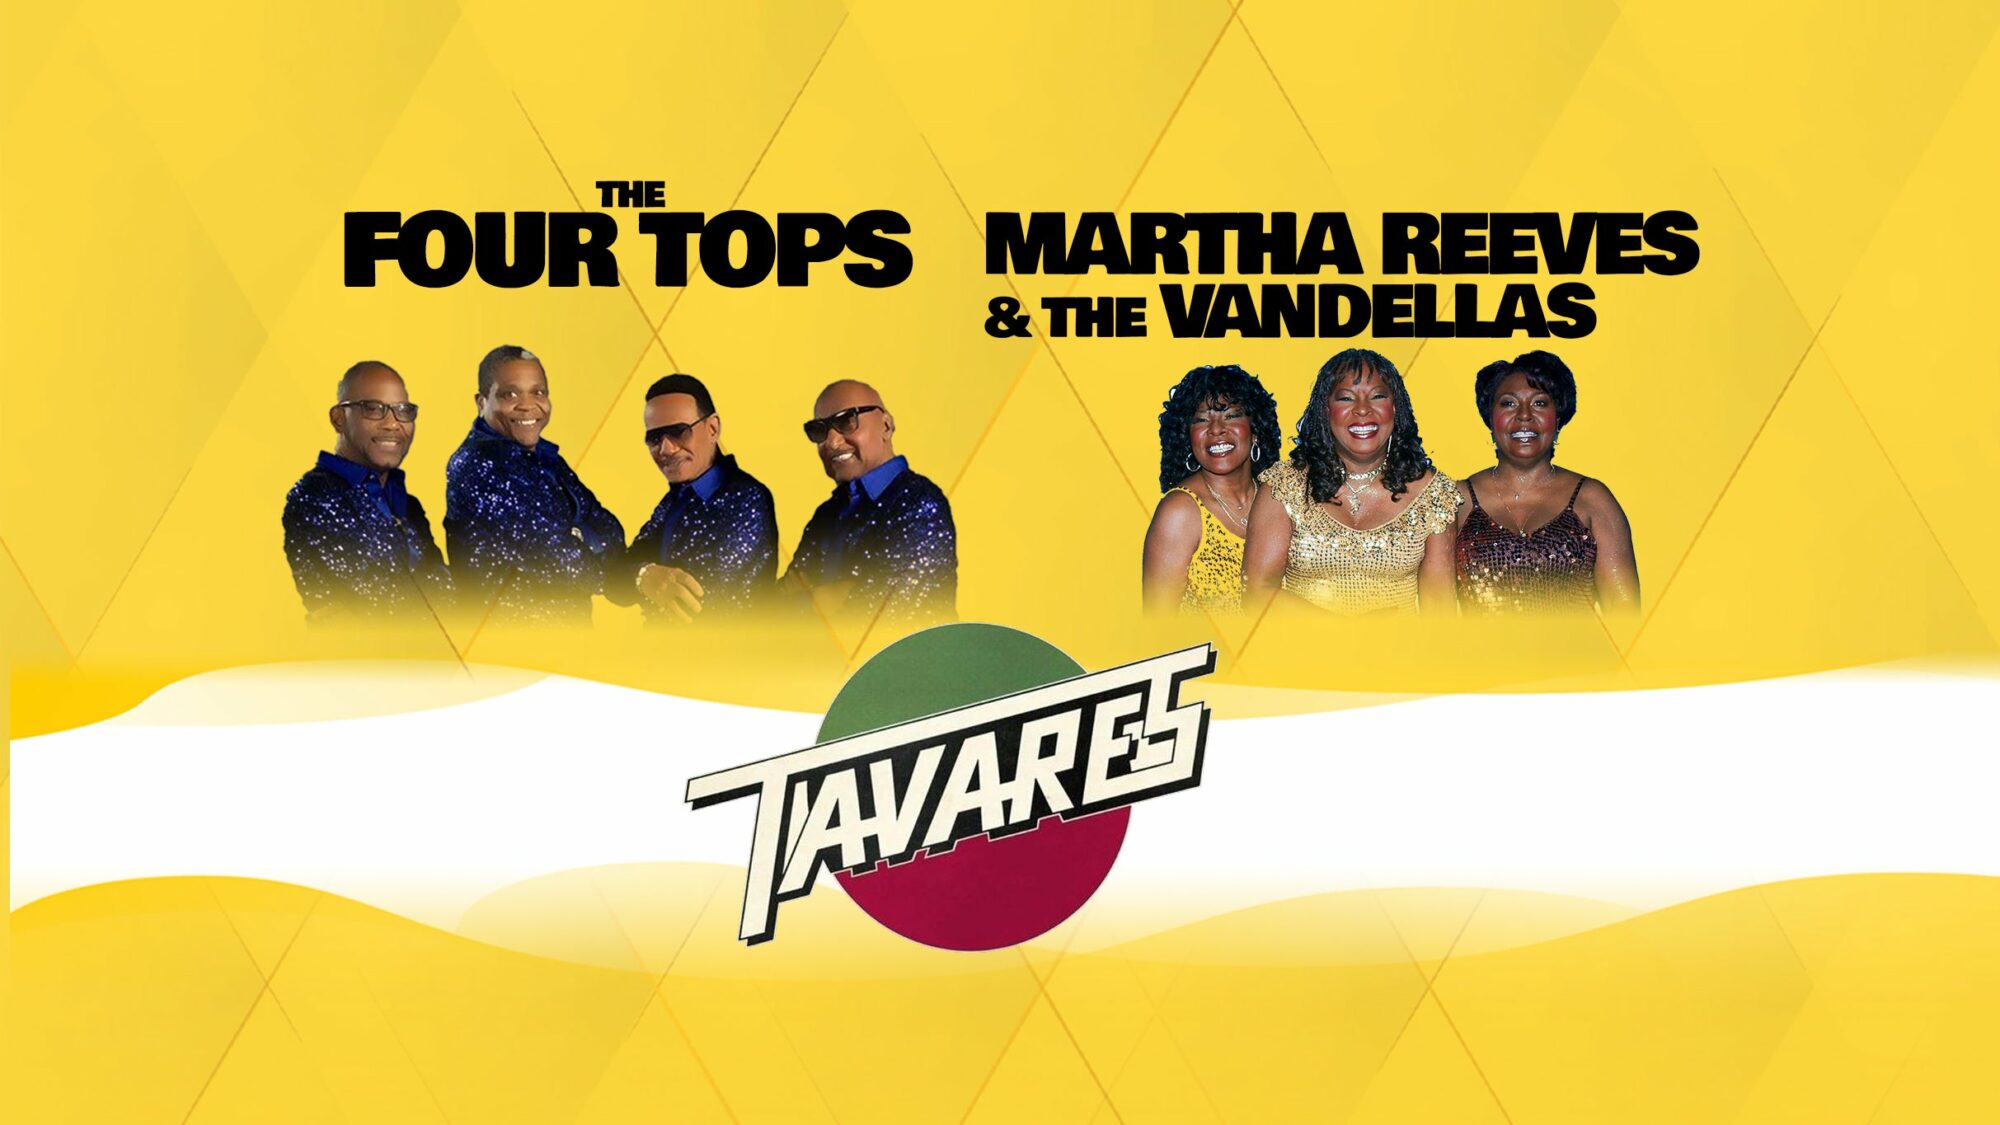 Image name The Four Tops Tavares Martha Reeves the Vandellas at Connexin Live Hull the 11 image from the post Events in Yorkshire.com.